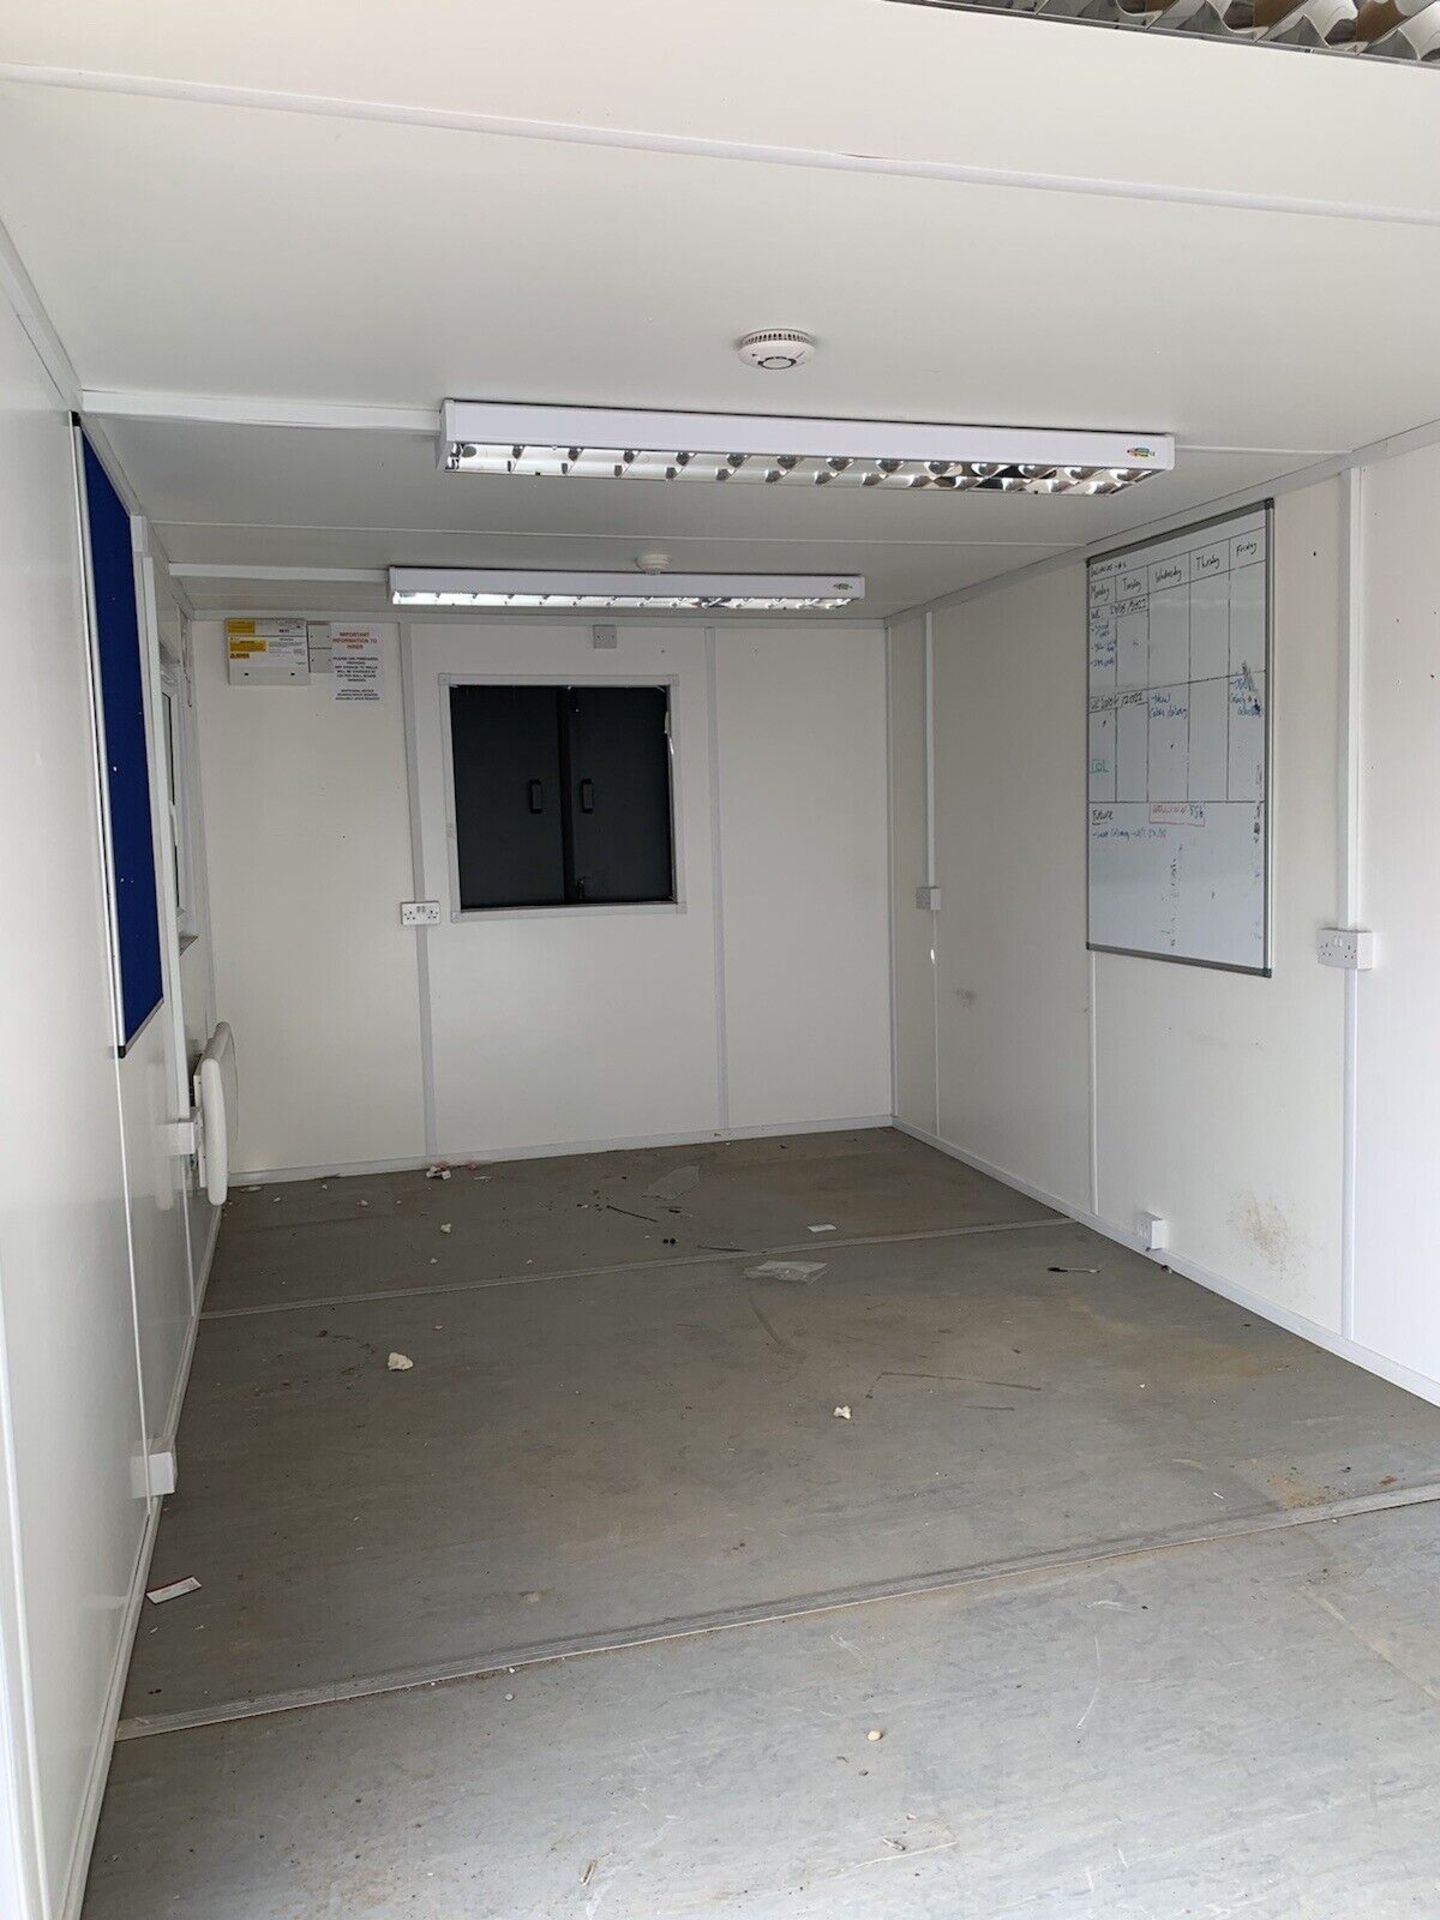 2 x 32ft Portable Offices that join together side-by-side - includes Site Cabin Canteen, Welfare Uni - Image 9 of 11